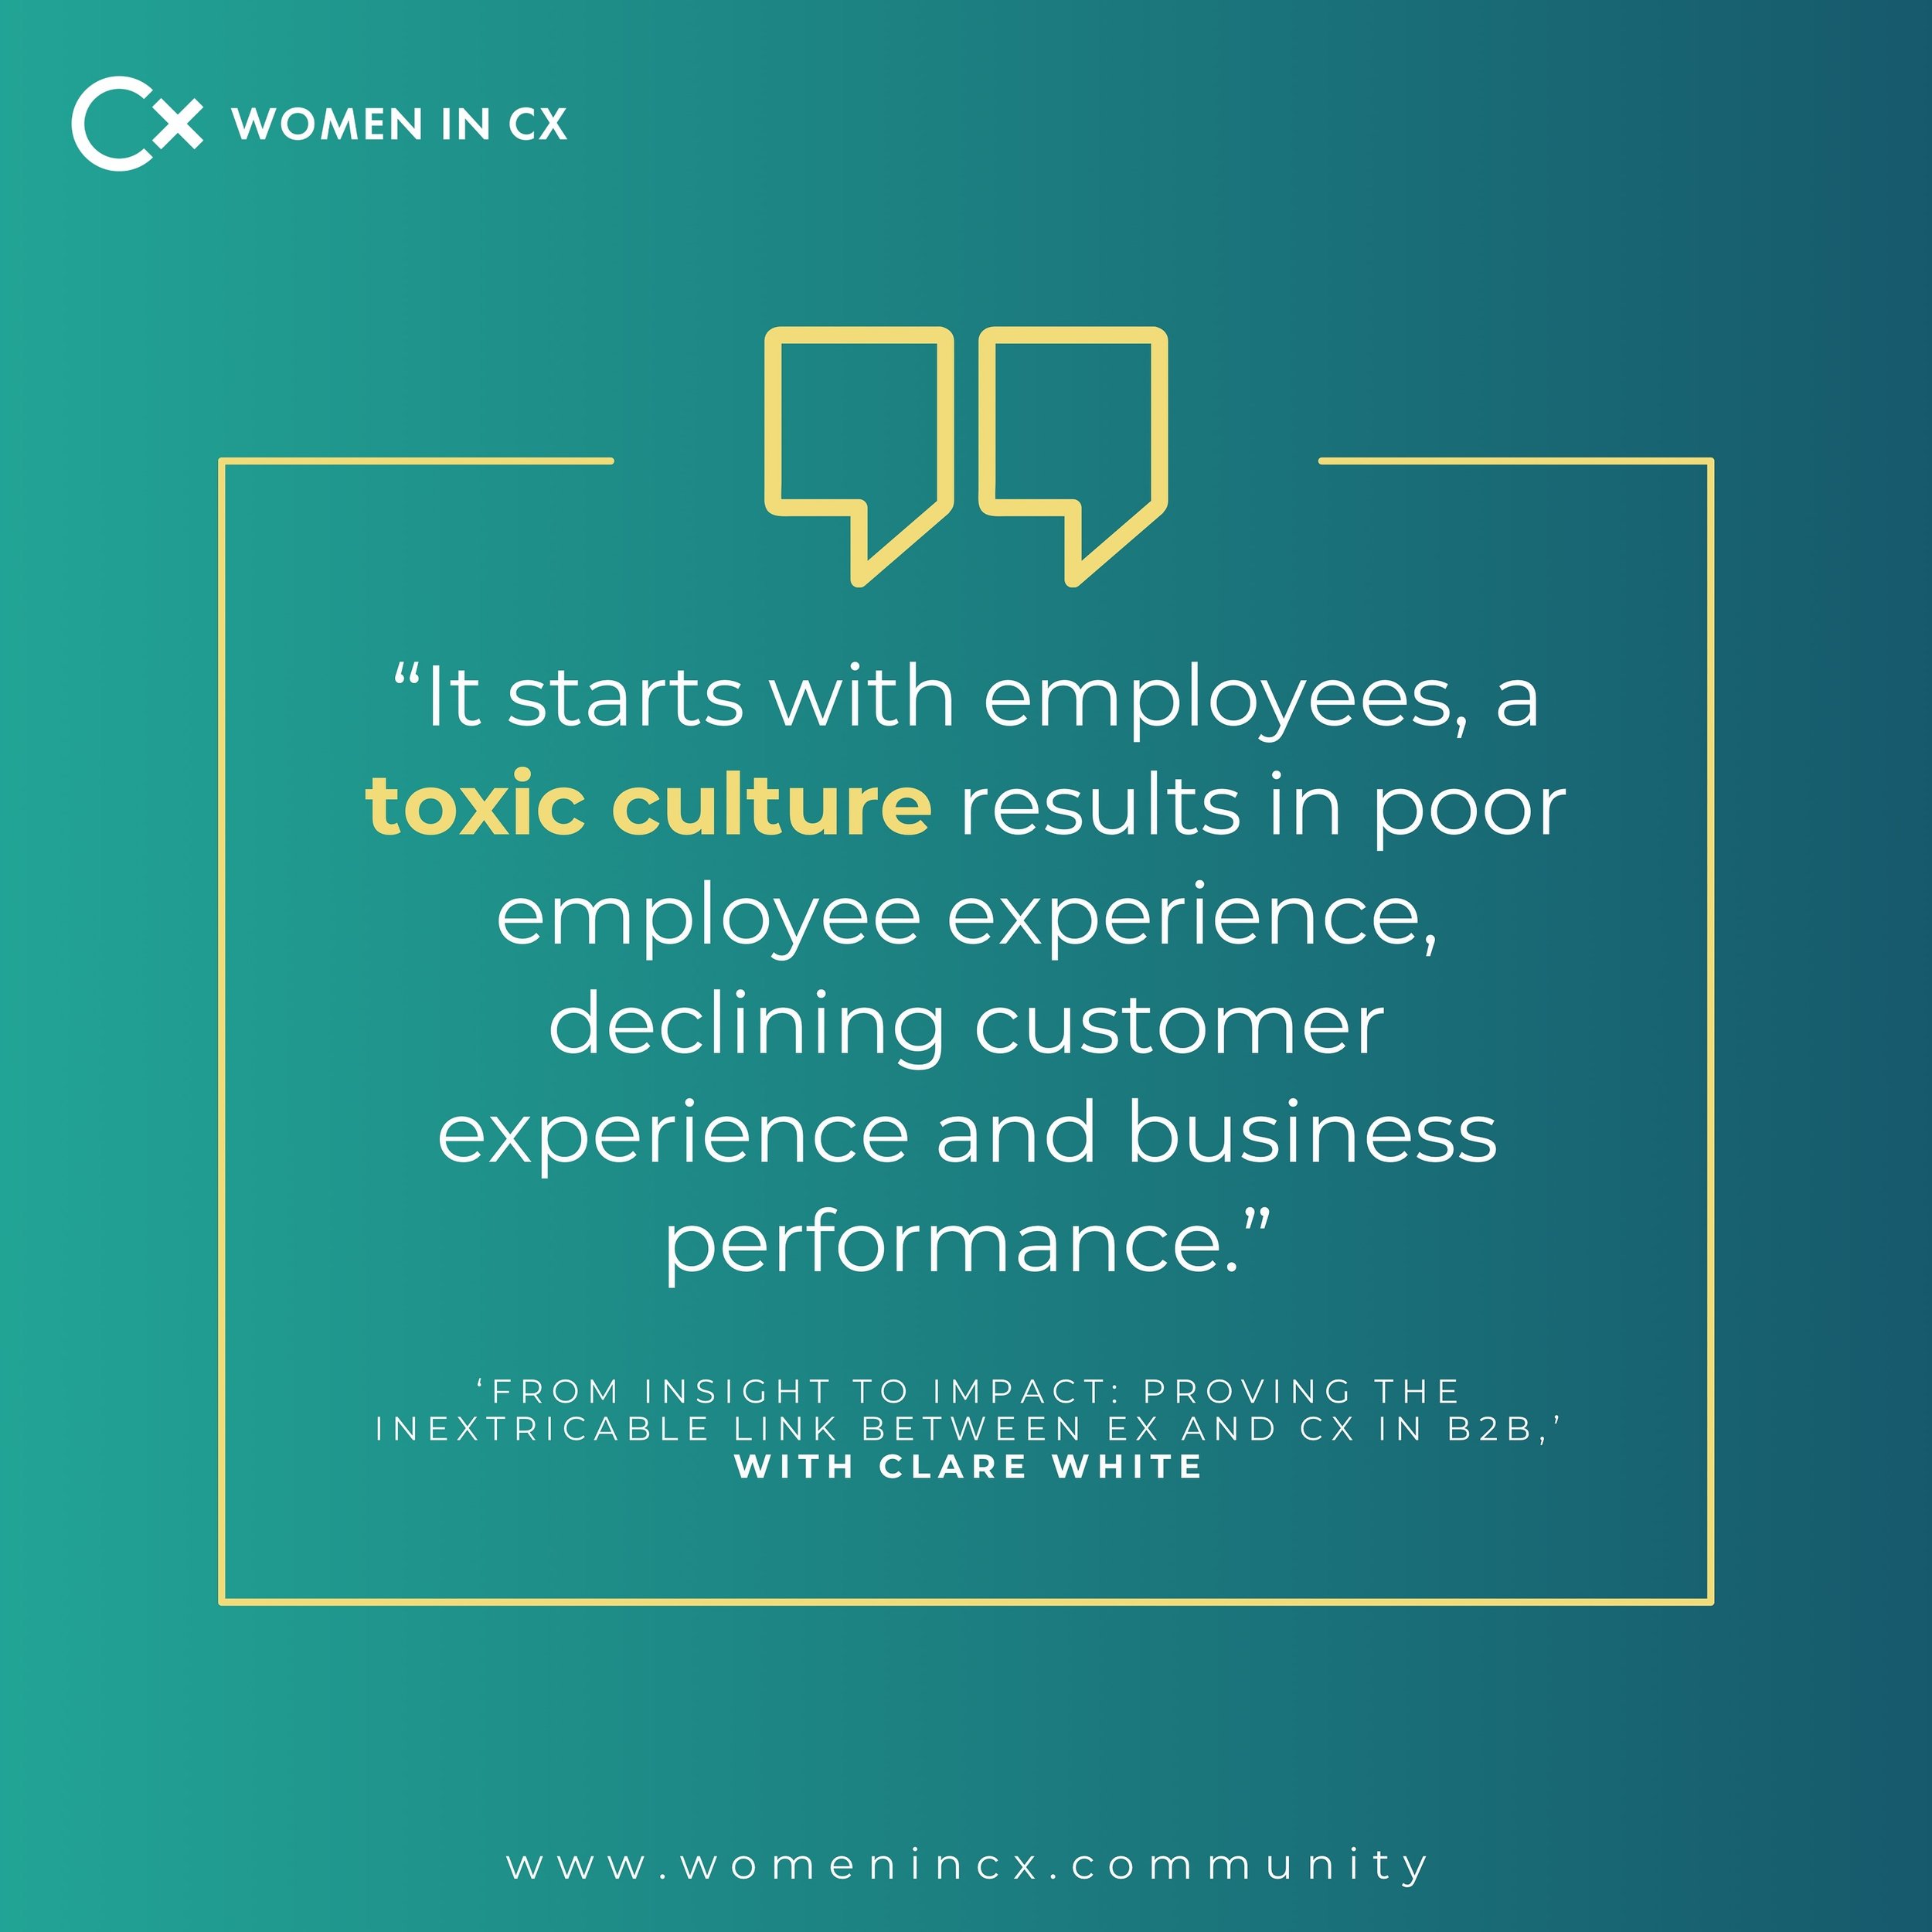 Just how inextricable is the link between employee and customer experience? 🔗
&nbsp;
Joined recently by Clare White, CEO and Founder of Connected CX, for her case study, &lsquo;From Insight to Impact: Proving the Inextricable Link Between EX and CX 